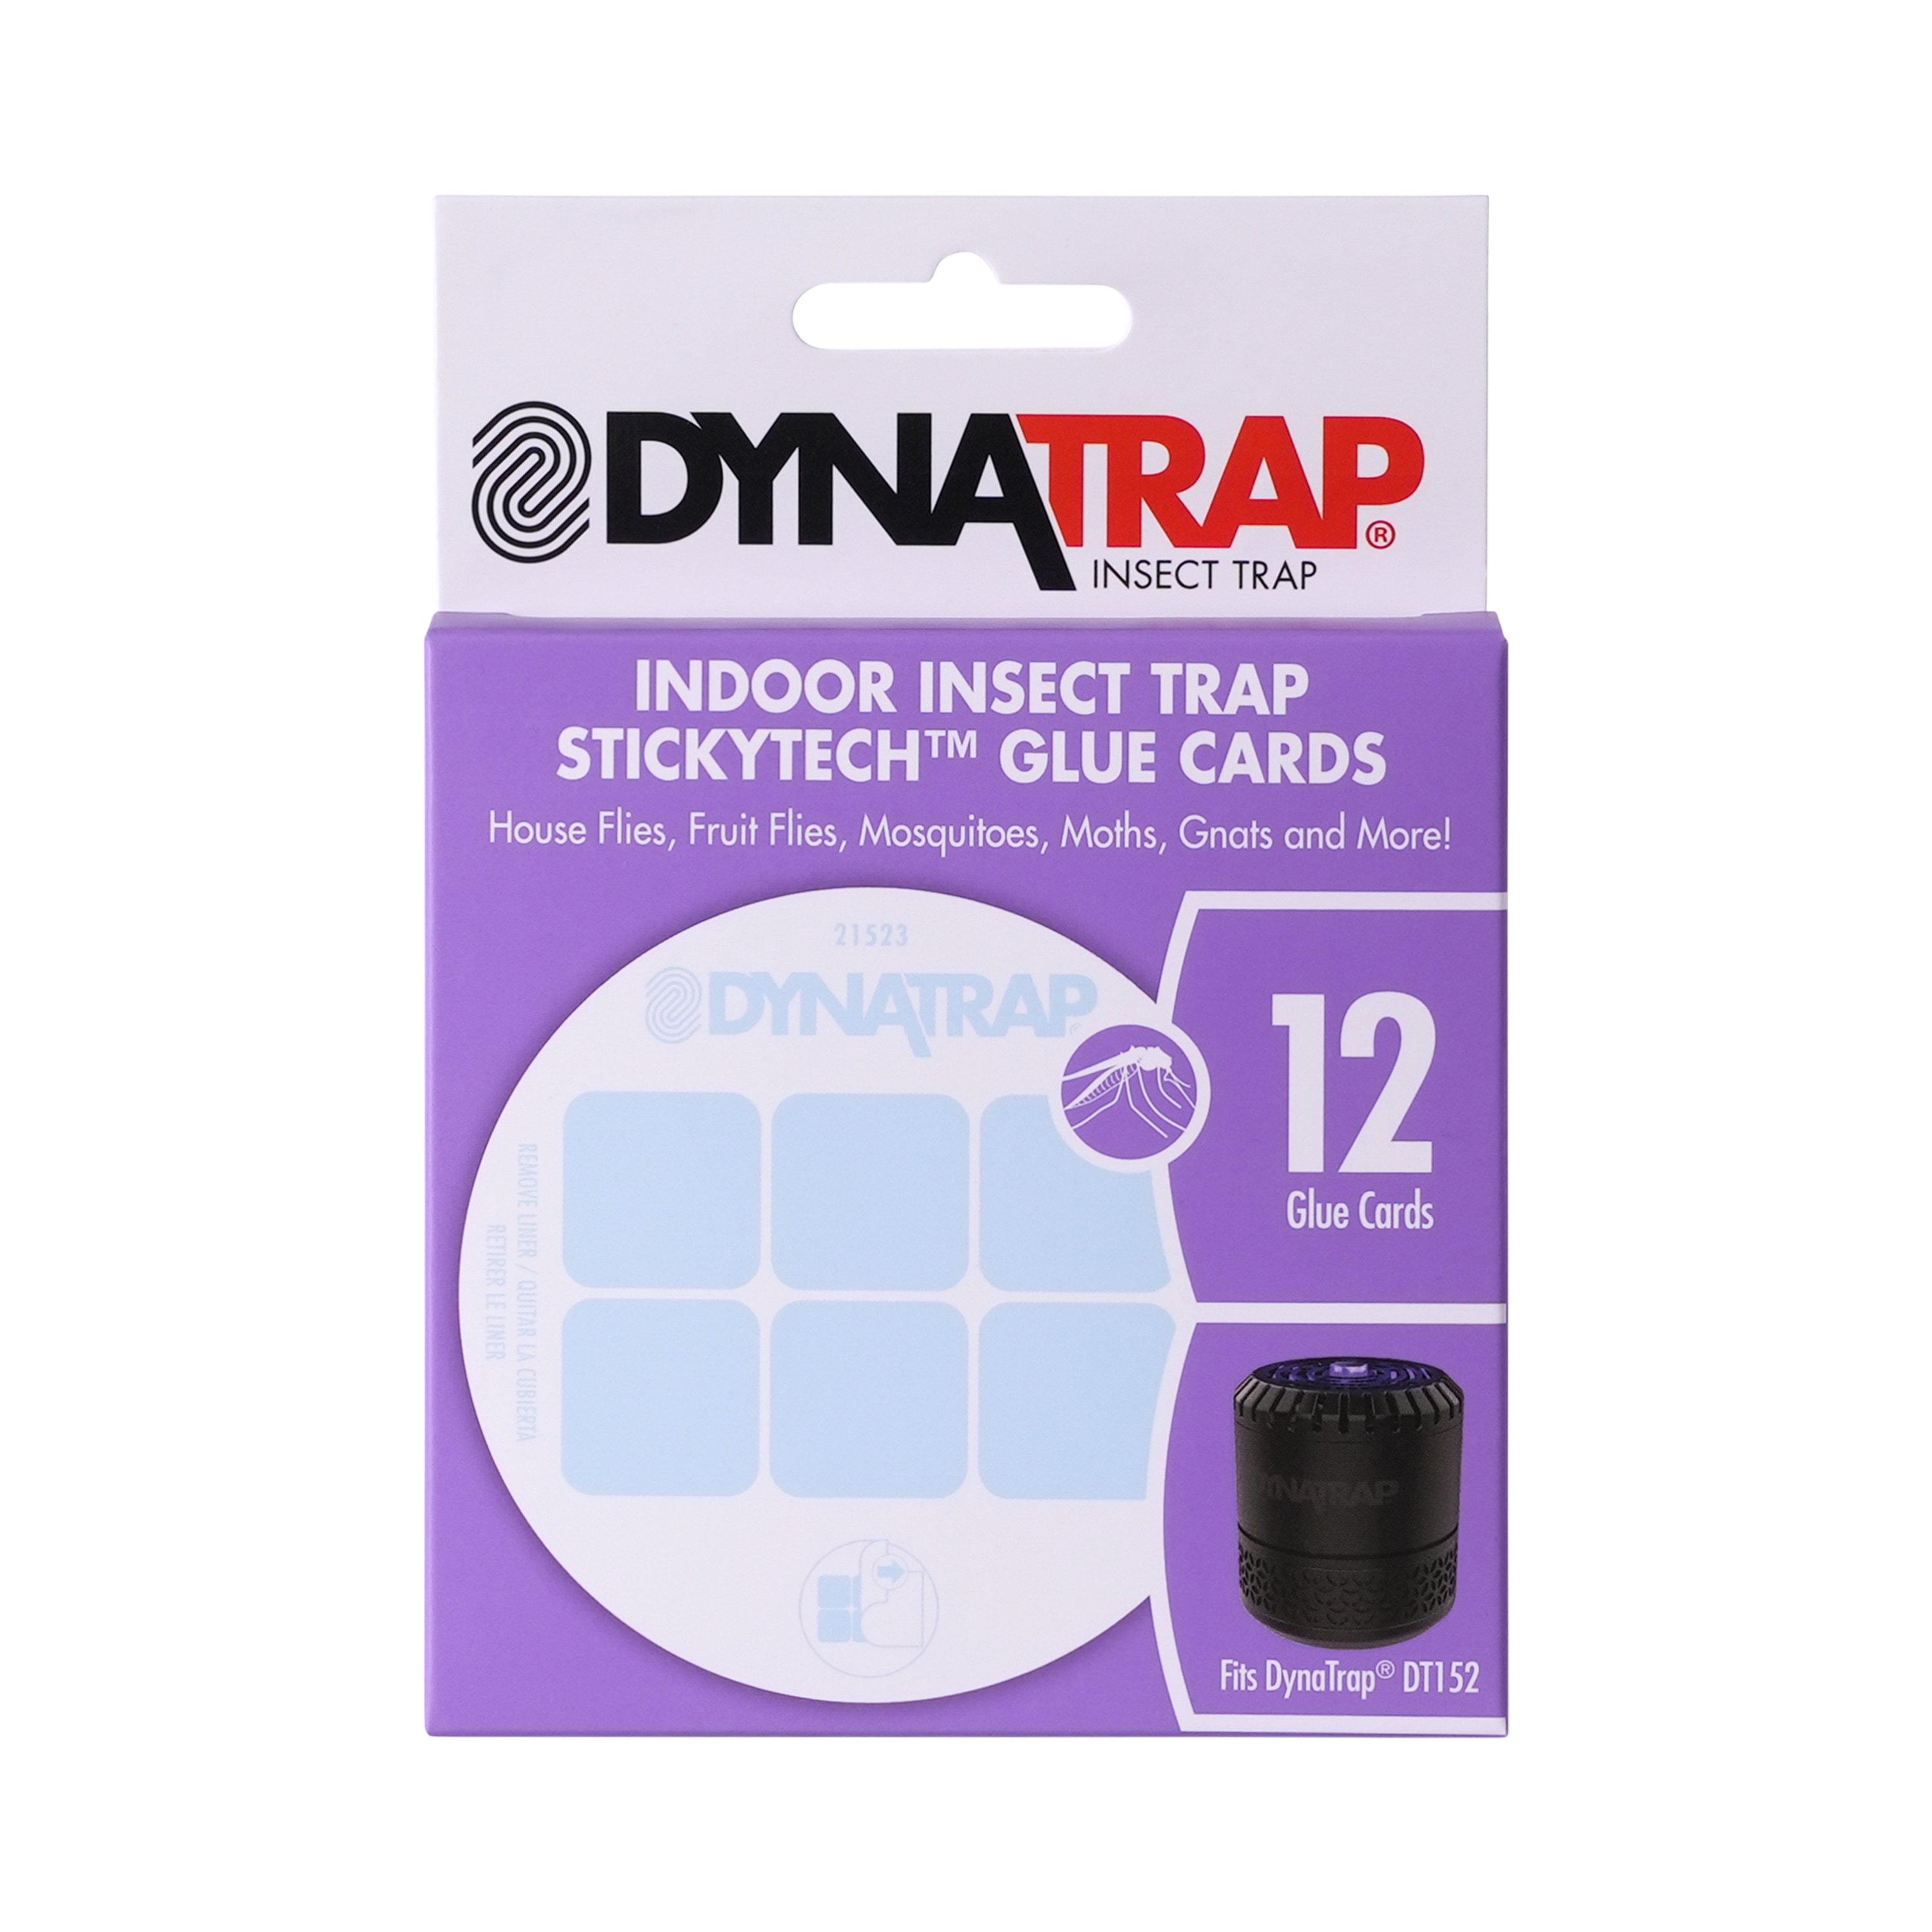 DynaTrap DT152 Indoor Insect Trap and Killer – Catches and Kills Fruit  Flies, Gnats, Moths, Mosquitoes & Other Flying Insects + DynaTrap 21523